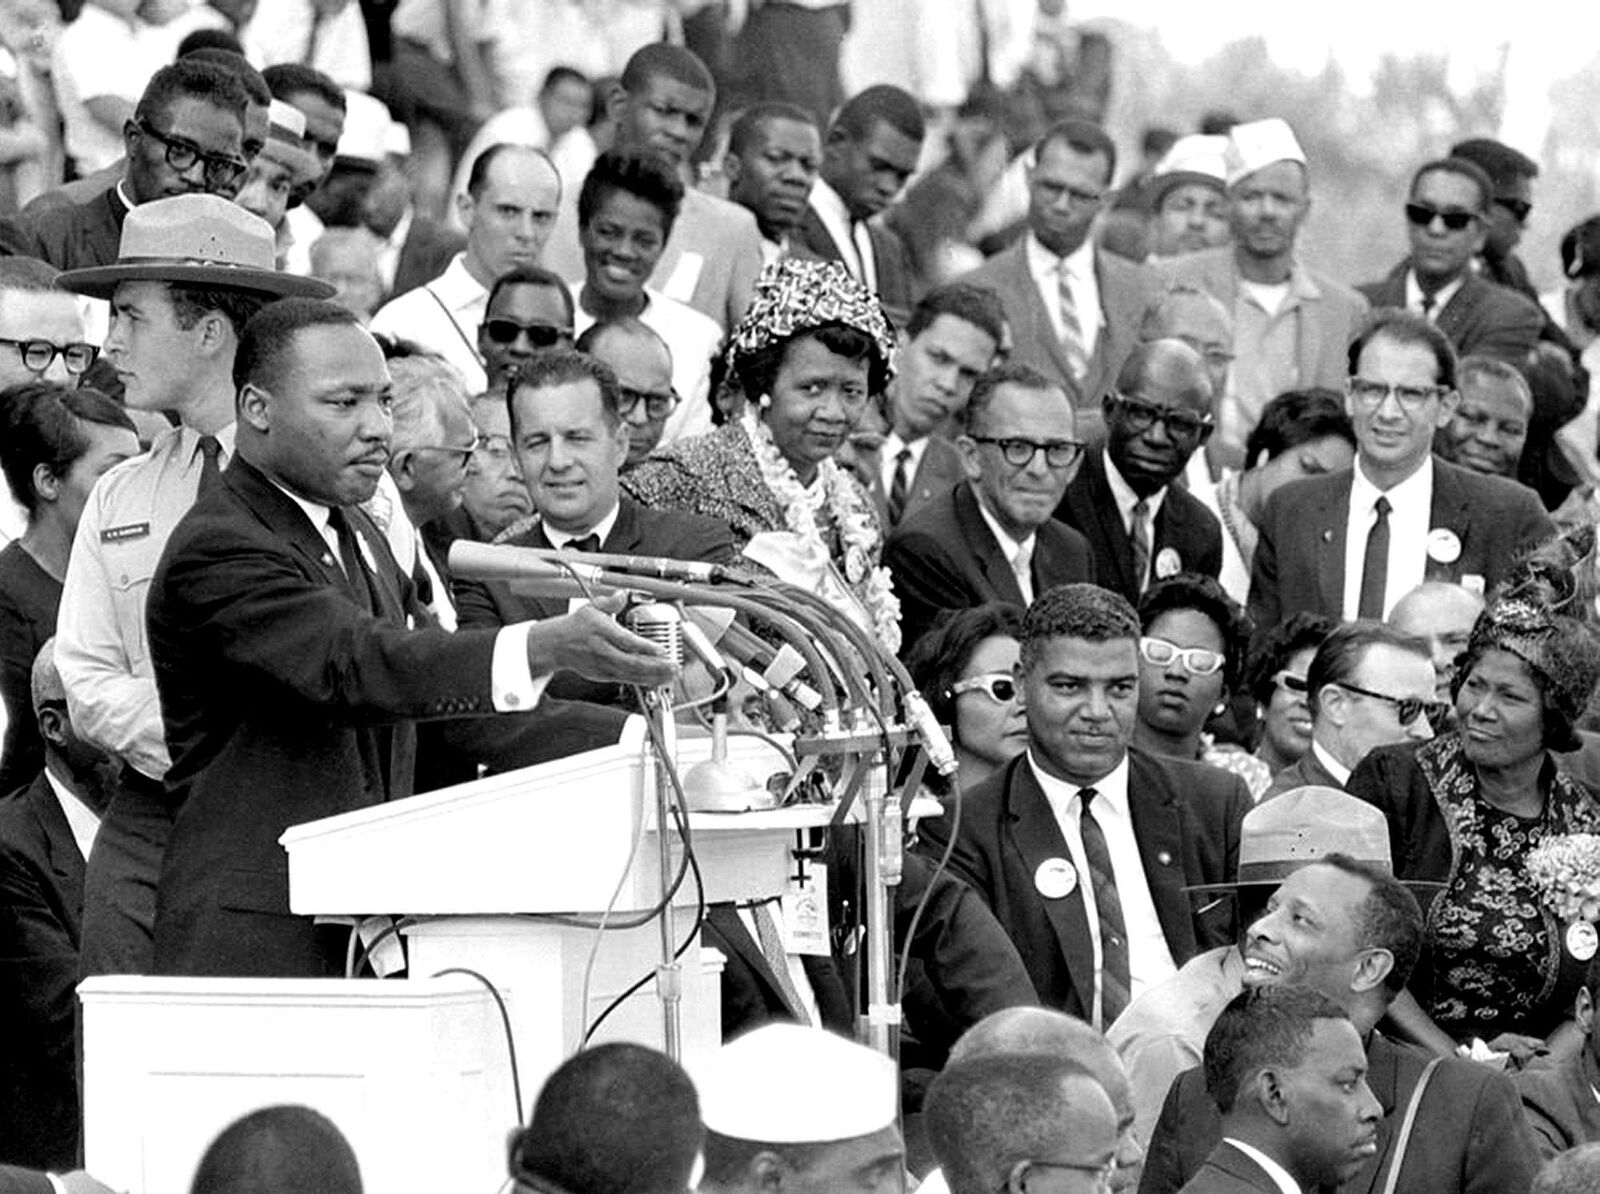 MARTIN LUTHER KING Speaking at Lincoln Memorial PHOTO (174-u)